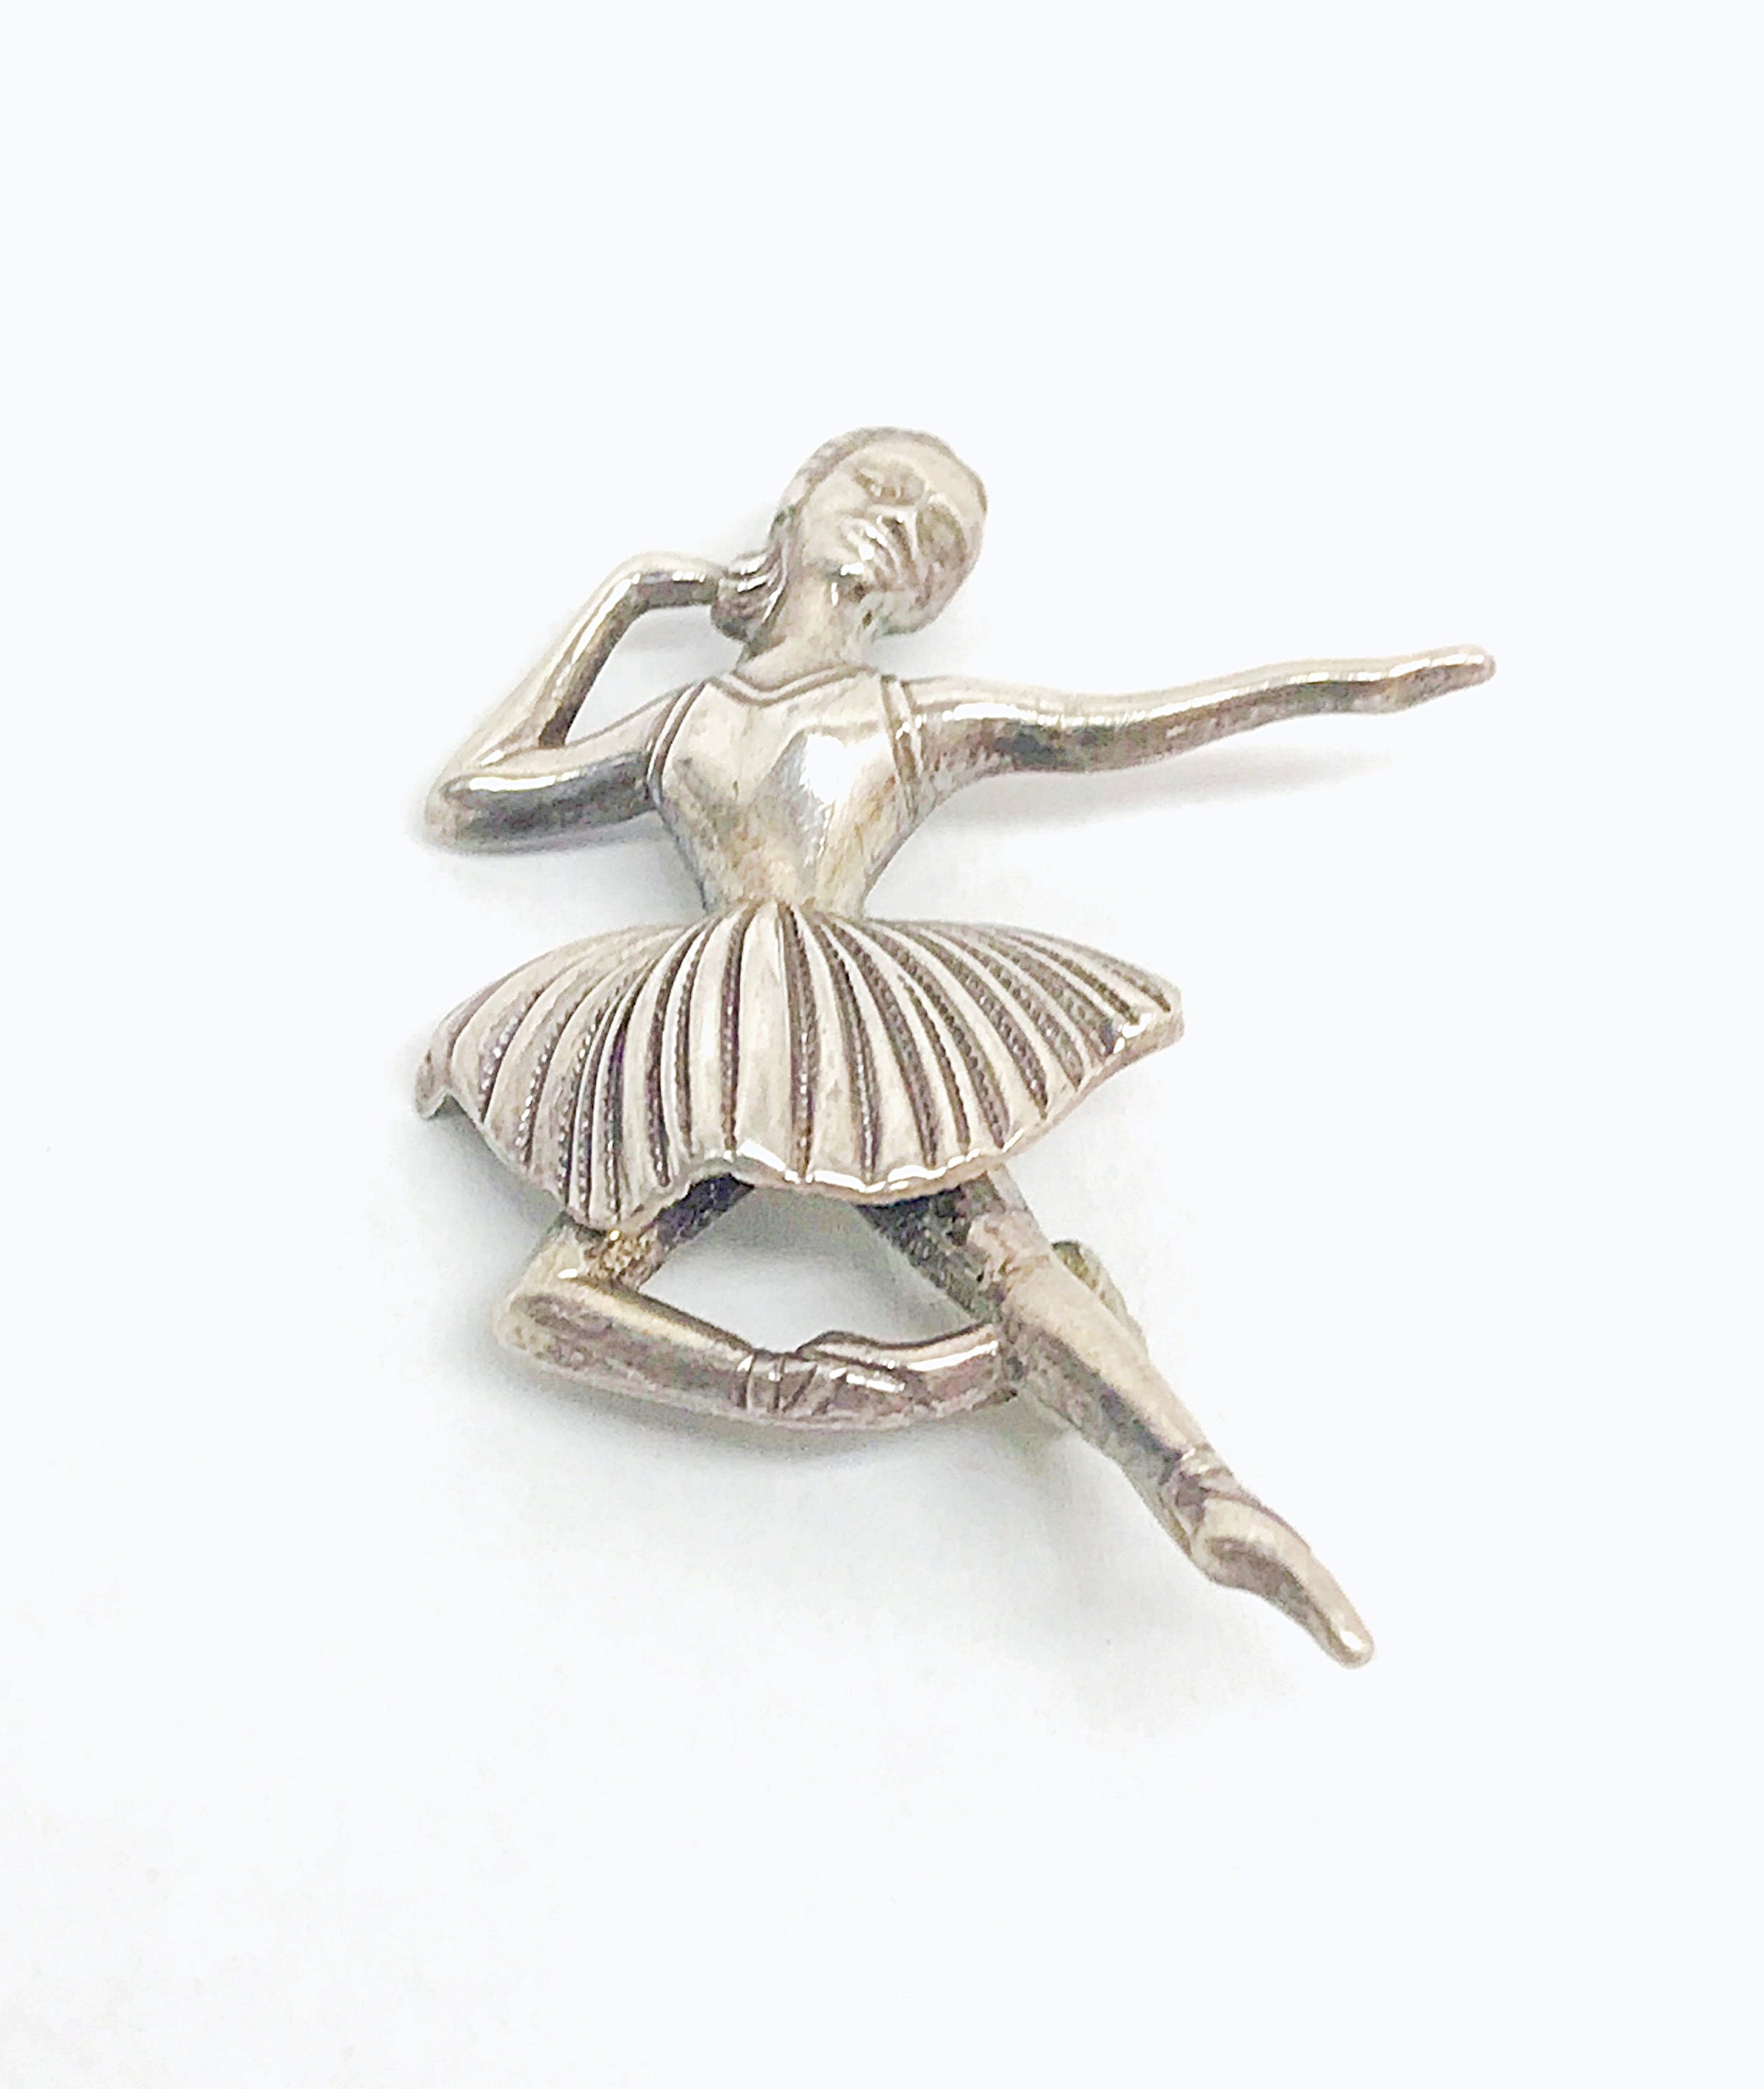 Vintage Sterling Silver Ballerina Brooch Pin - Hers and His Treasures